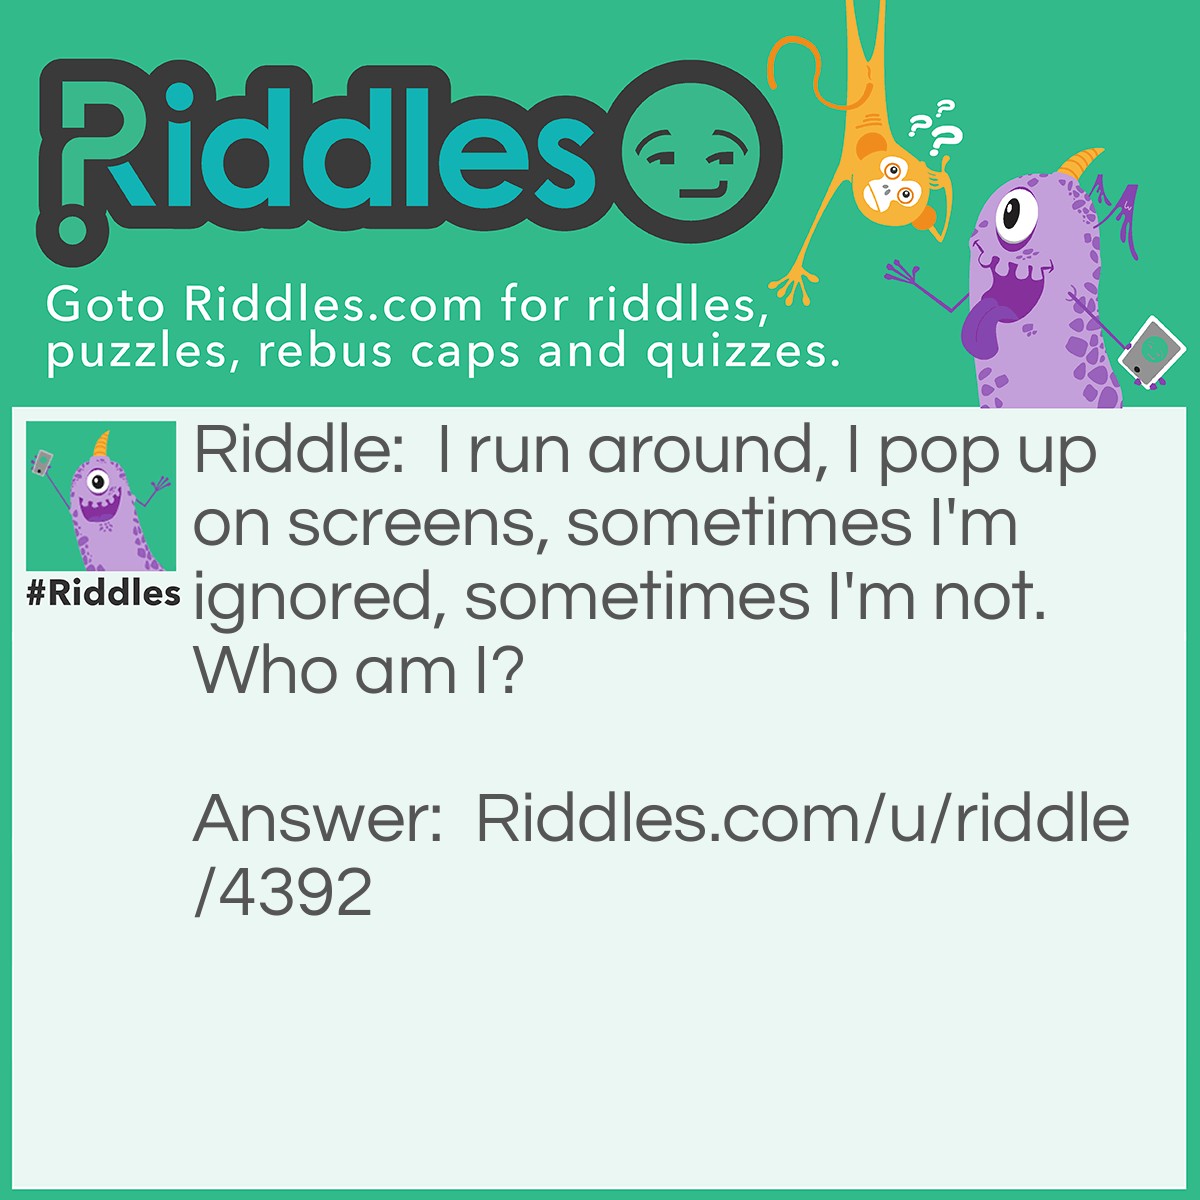 Riddle: I run around, I pop up on screens, sometimes I'm ignored, sometimes I'm not. Who am I? Answer: A text message.